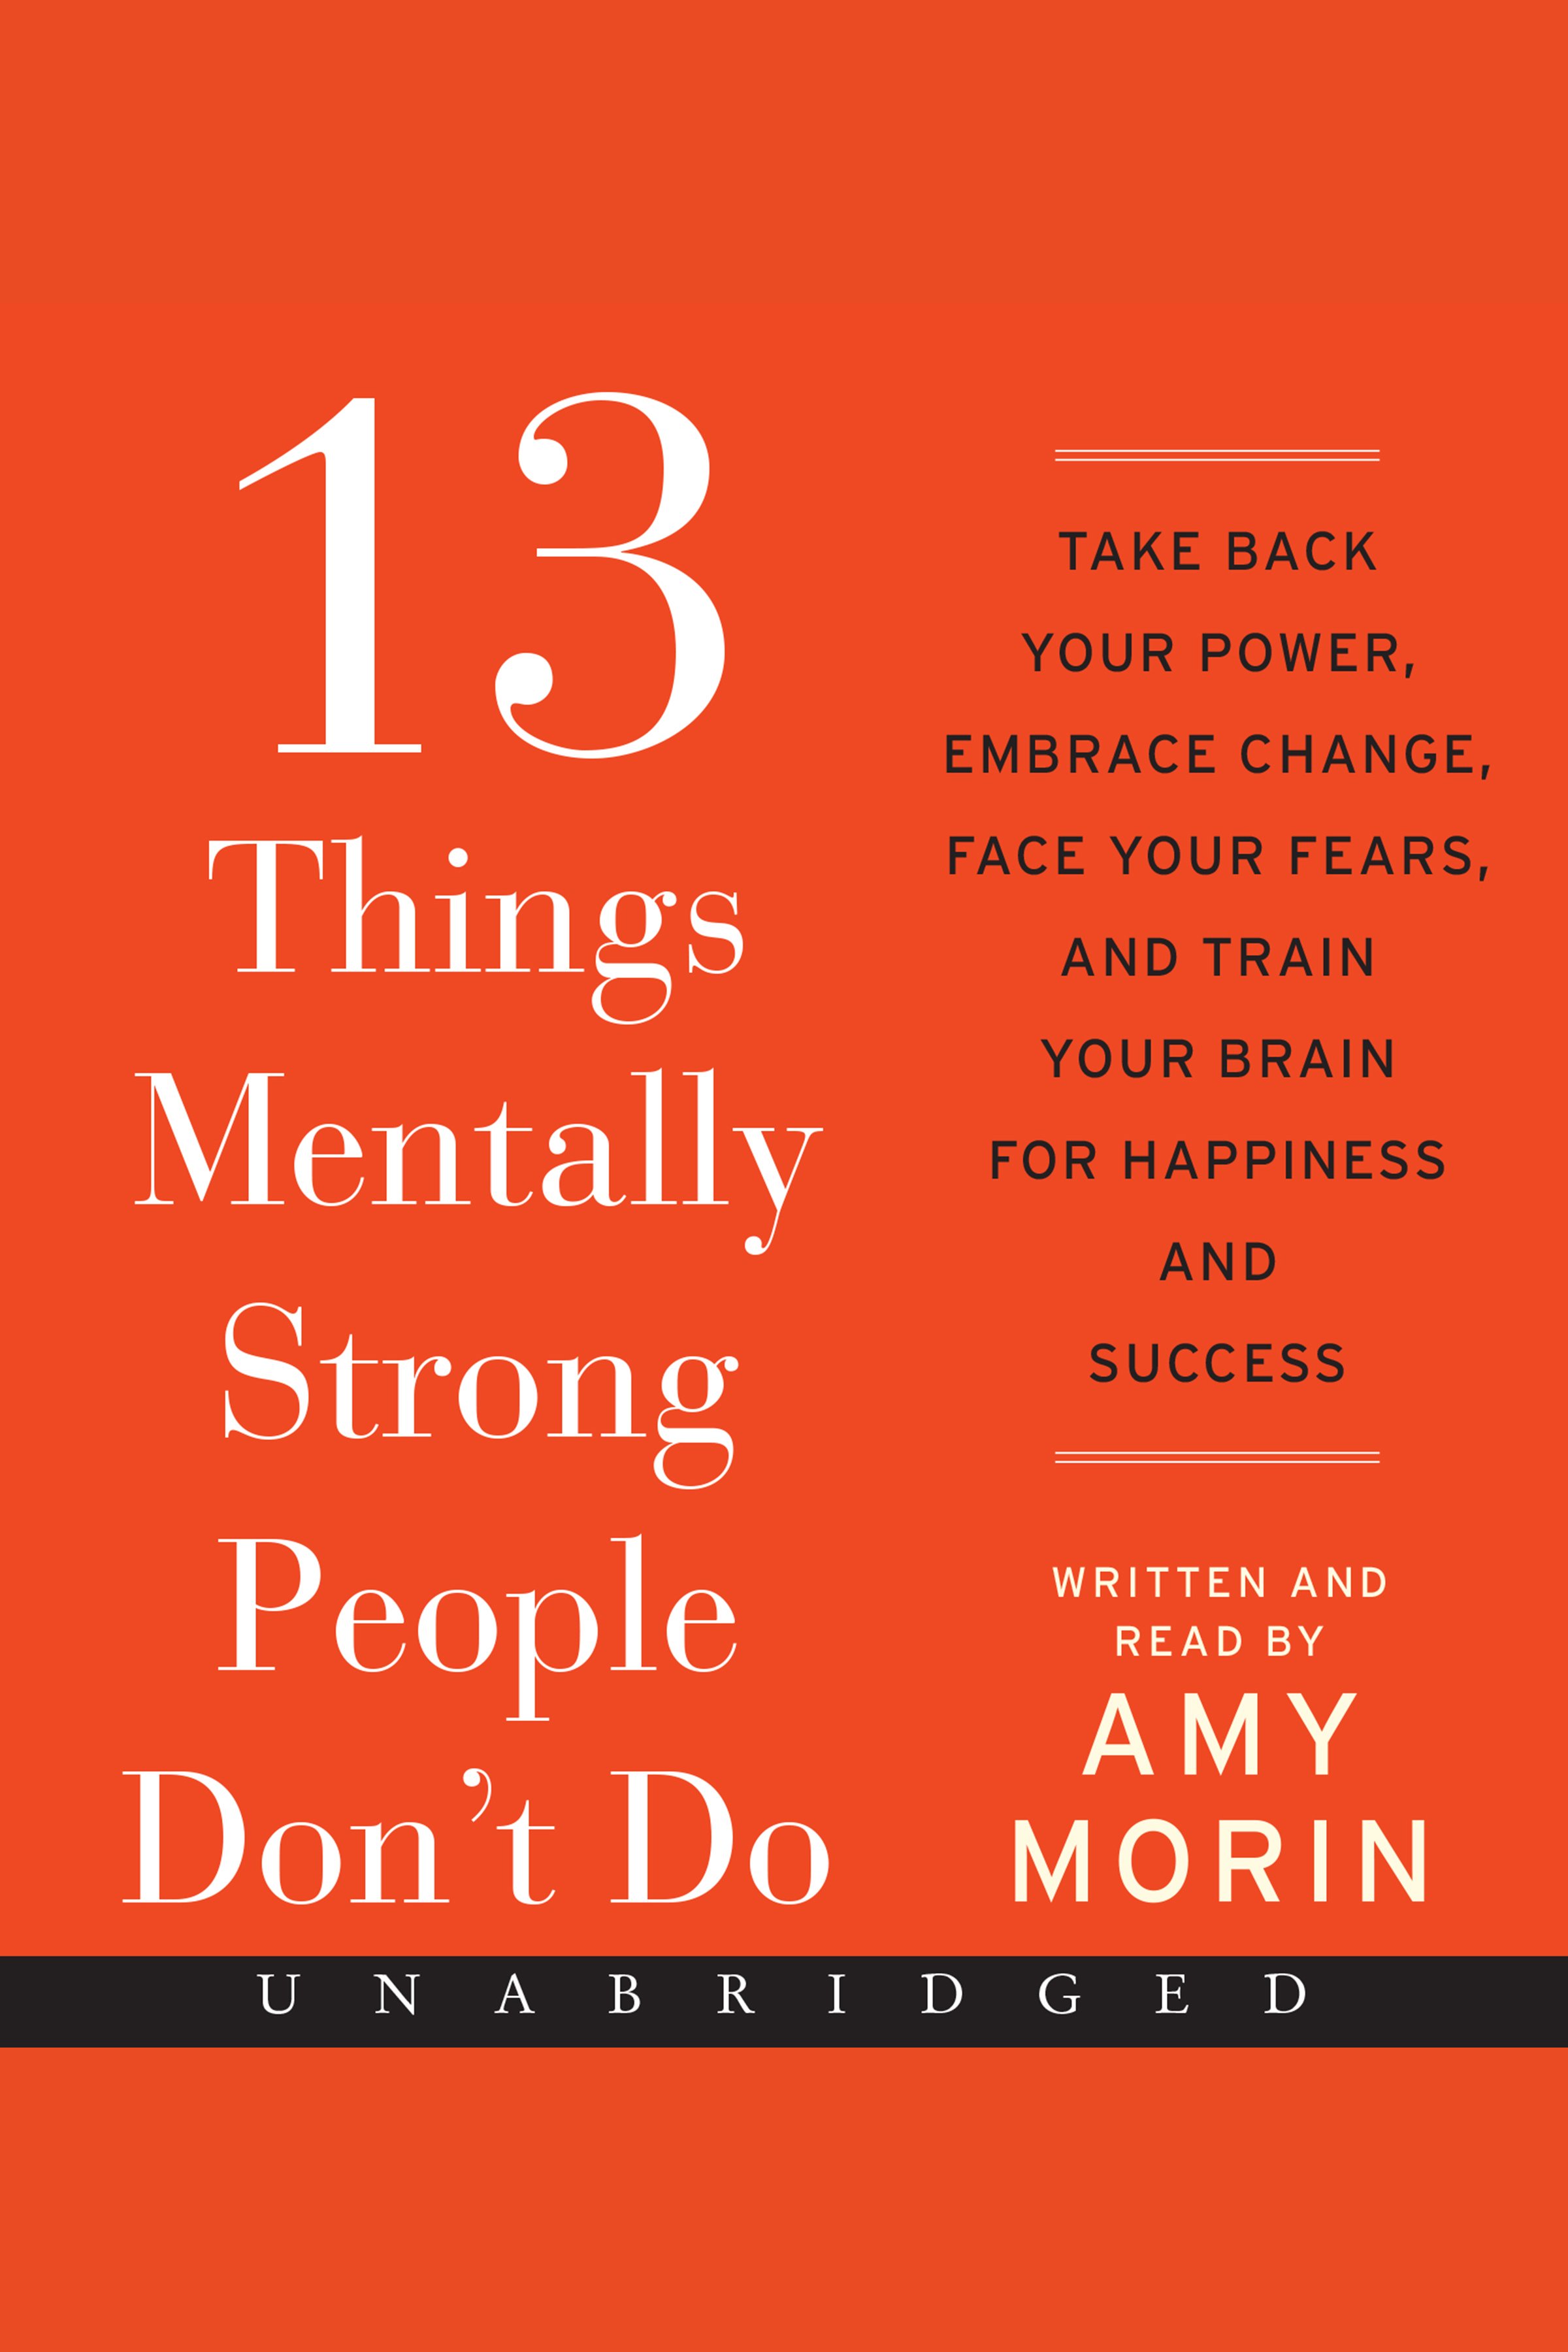 Imagen de portada para 13 Things Mentally Strong People Don't Do [electronic resource] : Take Back Your Power, Embrace Change, Face Your Fears, and Train Your Brain for Happiness and Success